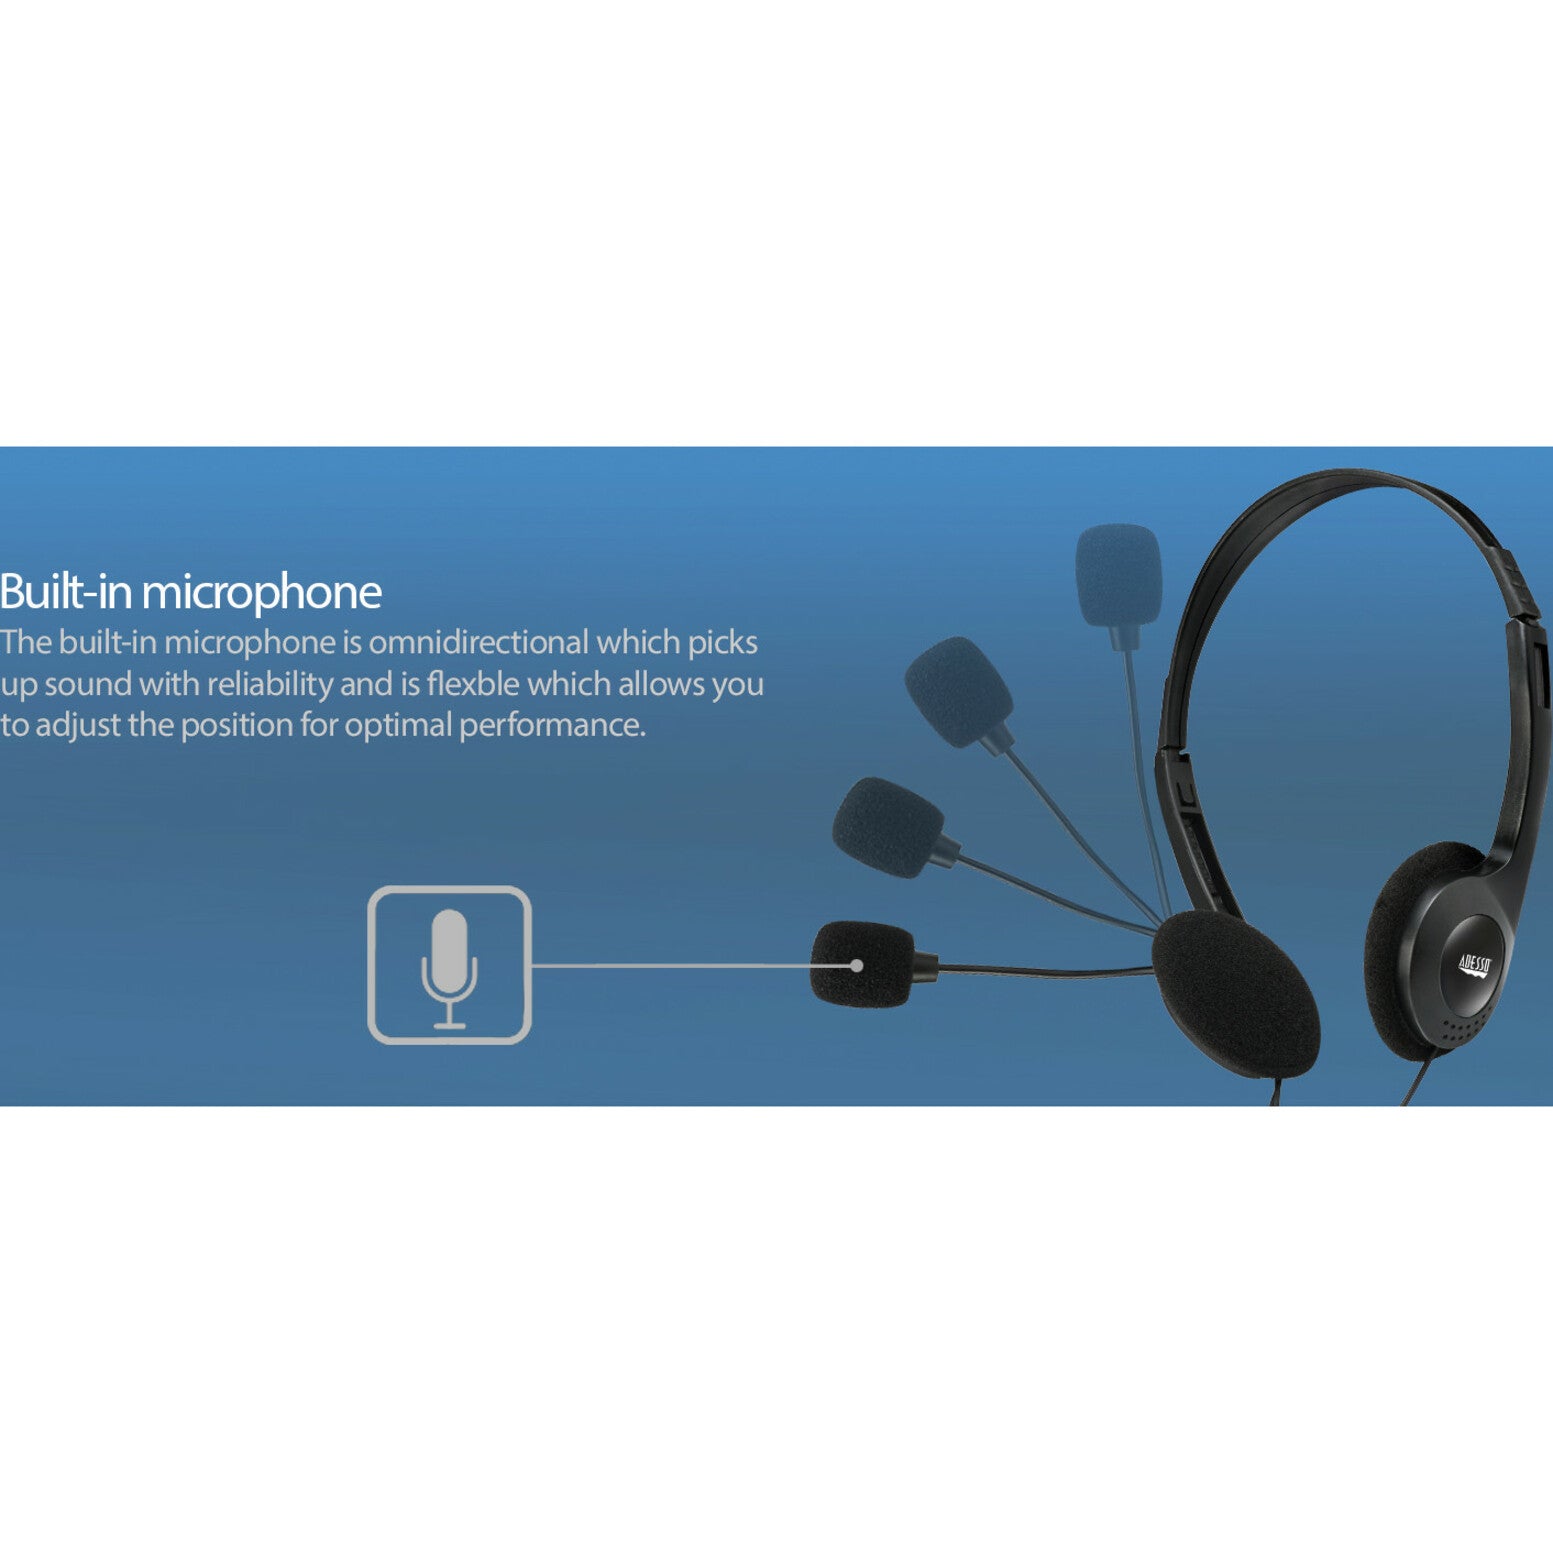 Adesso XTREAM H4 Stereo Headset with Microphone, Over-the-head, Inline Volume Control